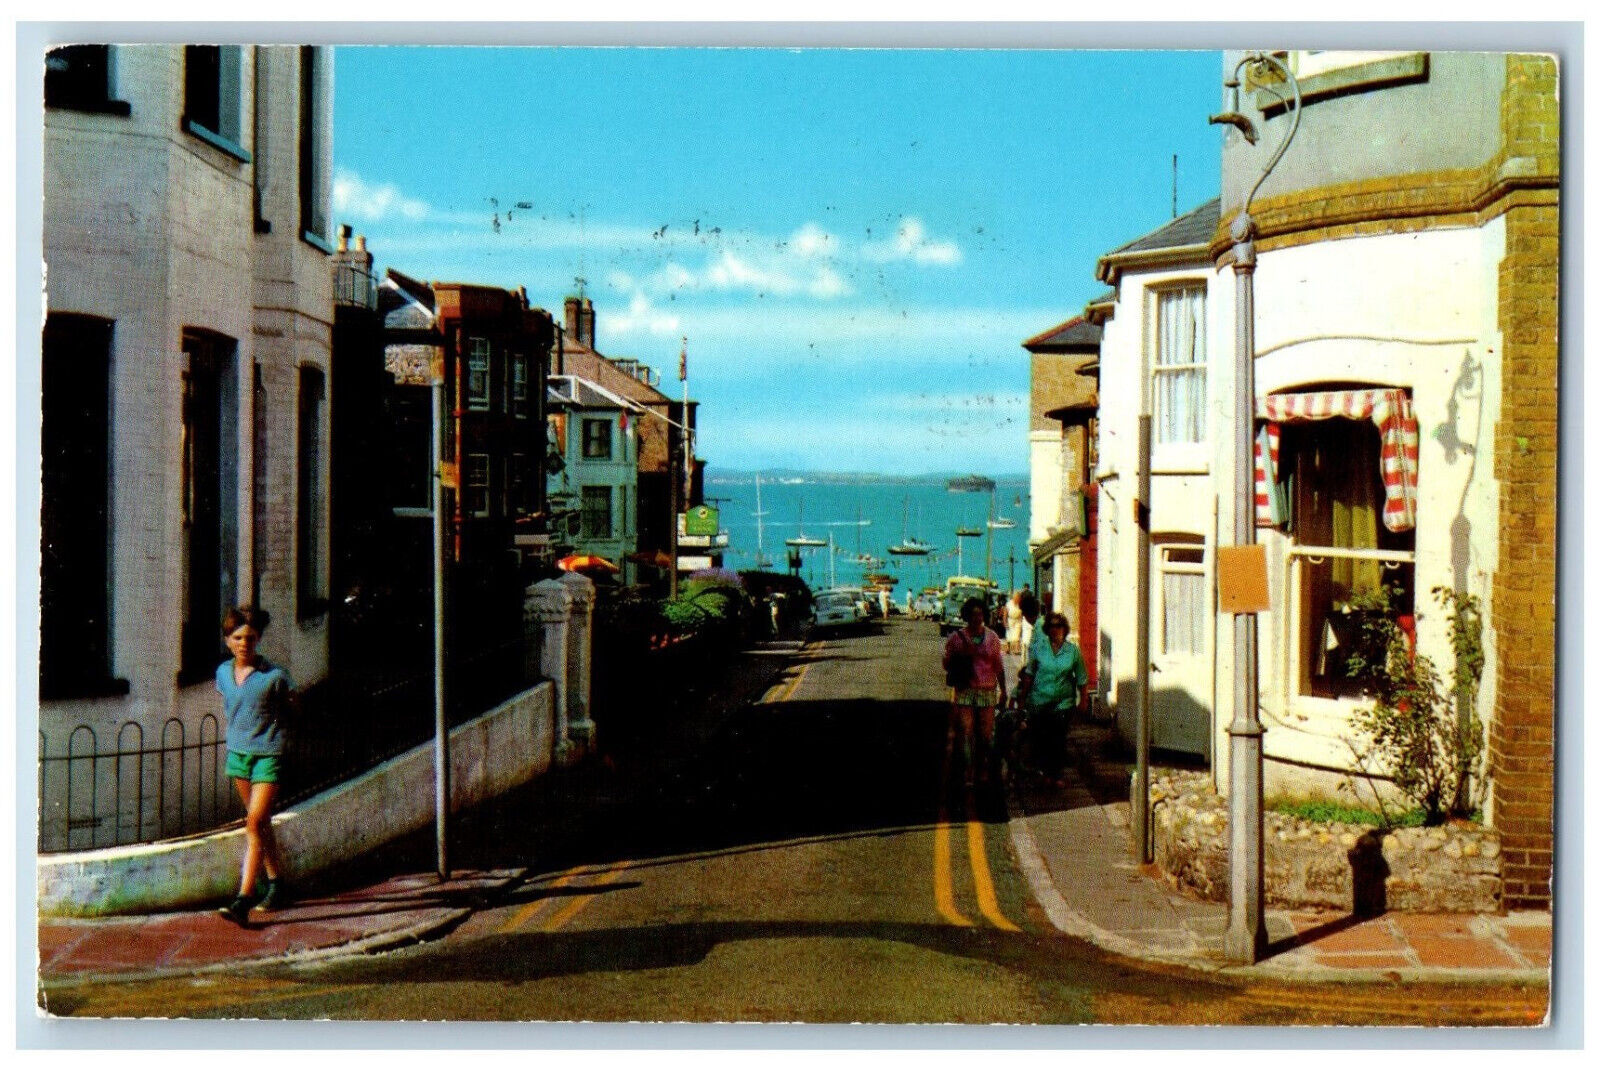 Isle of Wight England Postcard High Street Sea View 1970 Vintage Posted